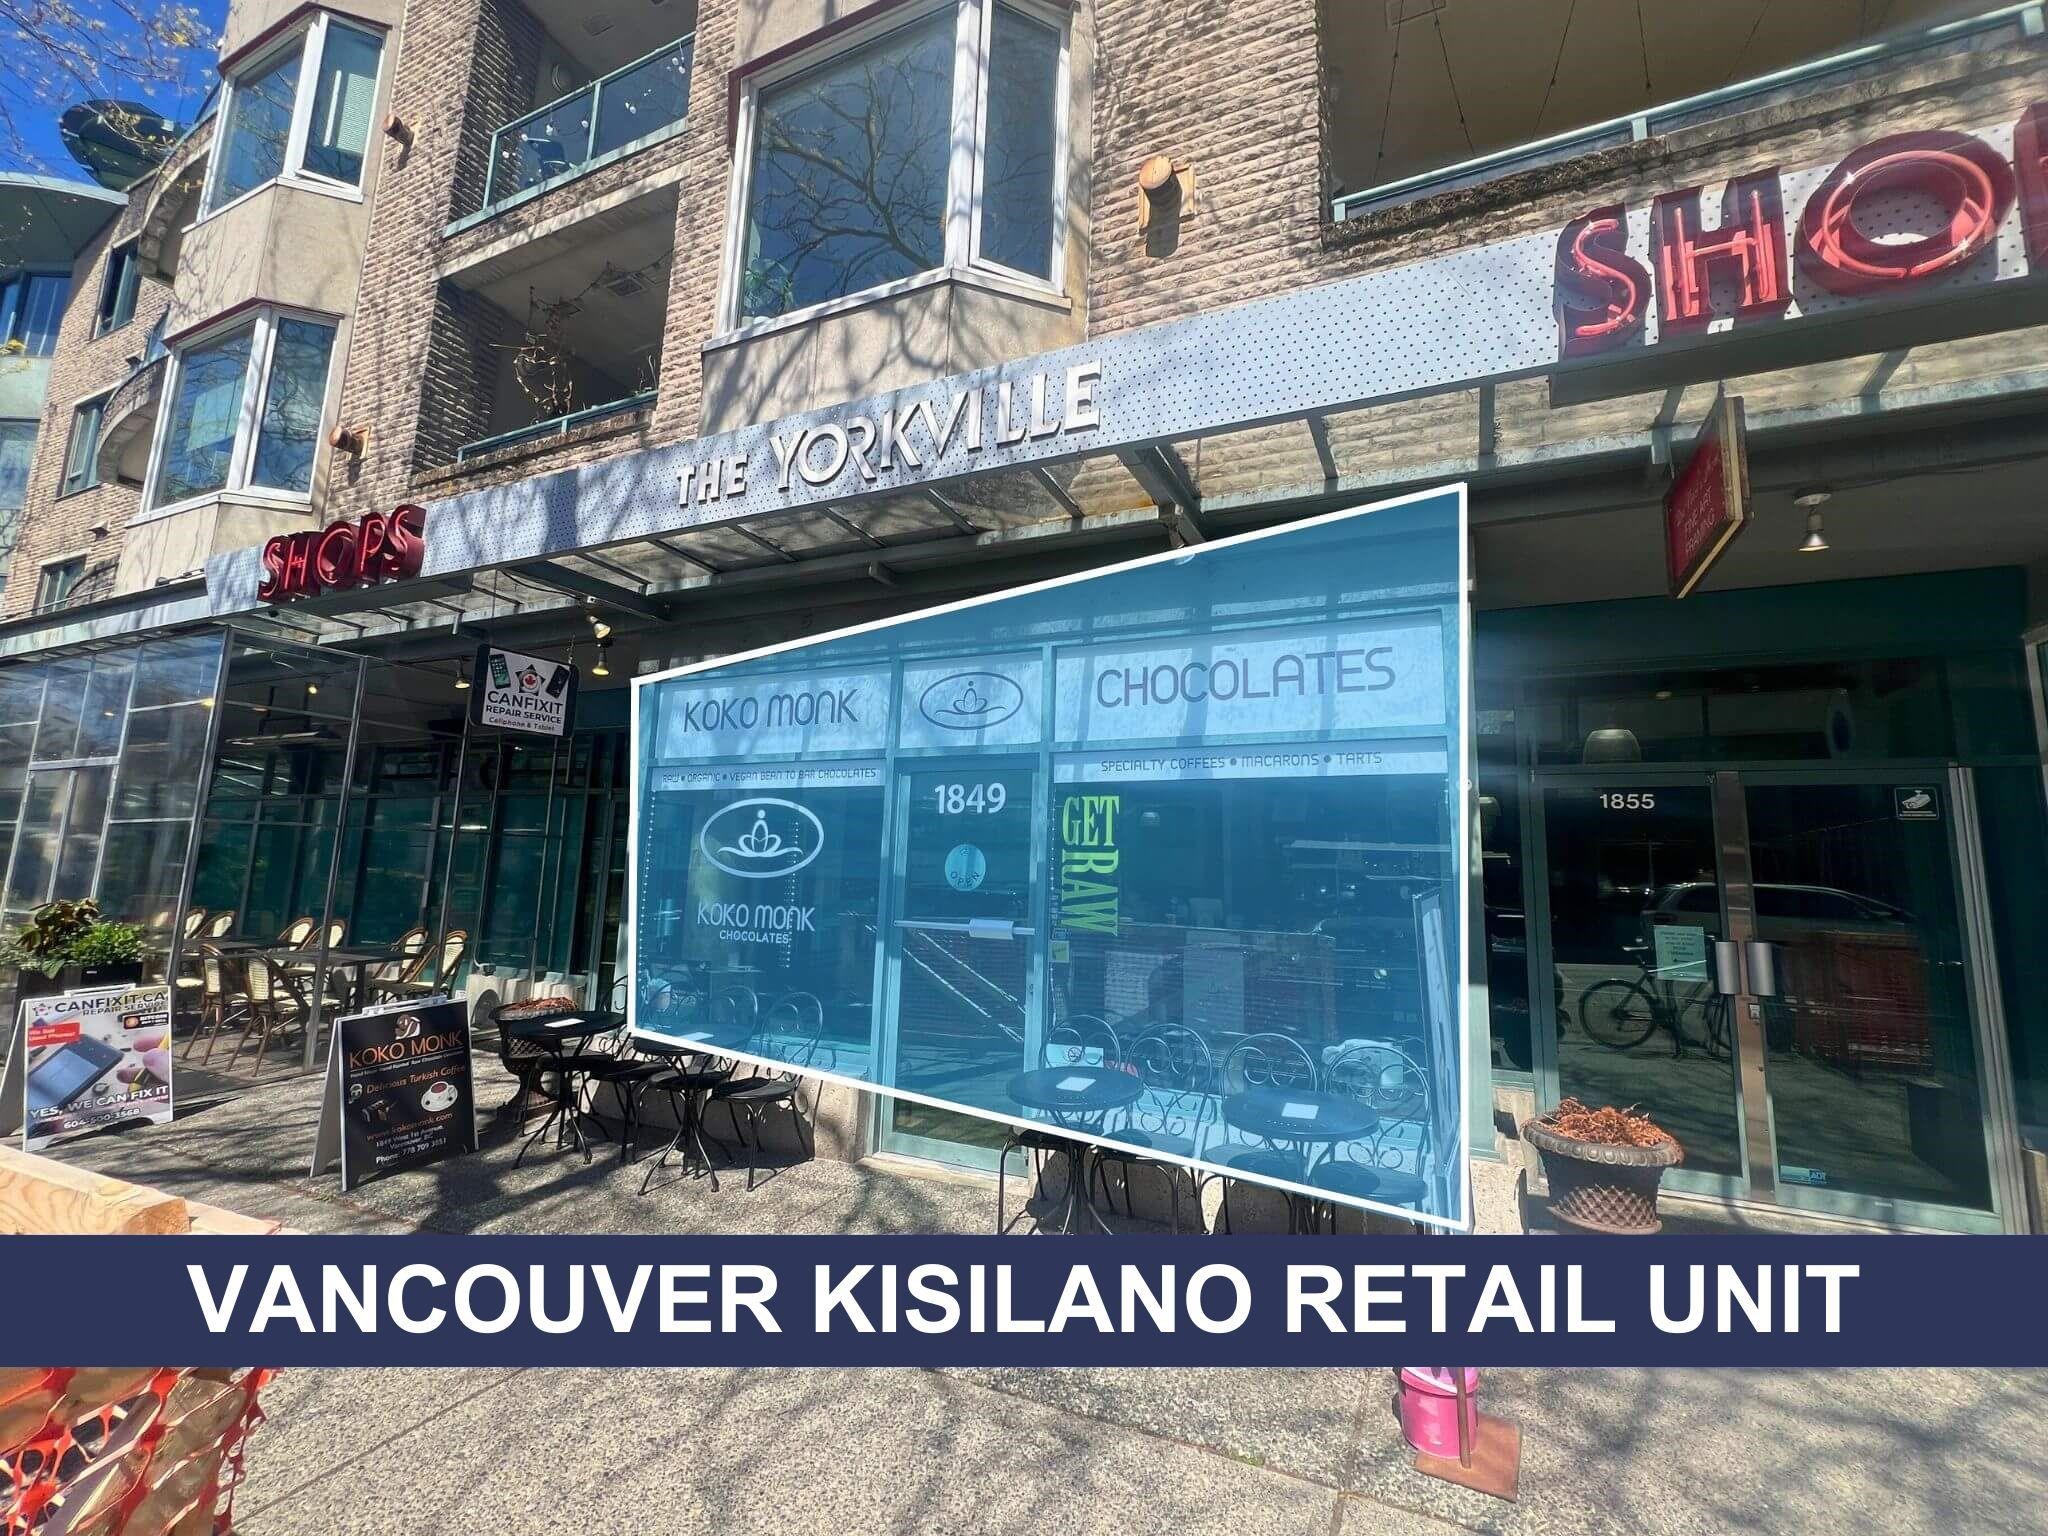 Kitsilano Land Commercial for sale:    (Listed 6800-05-19)